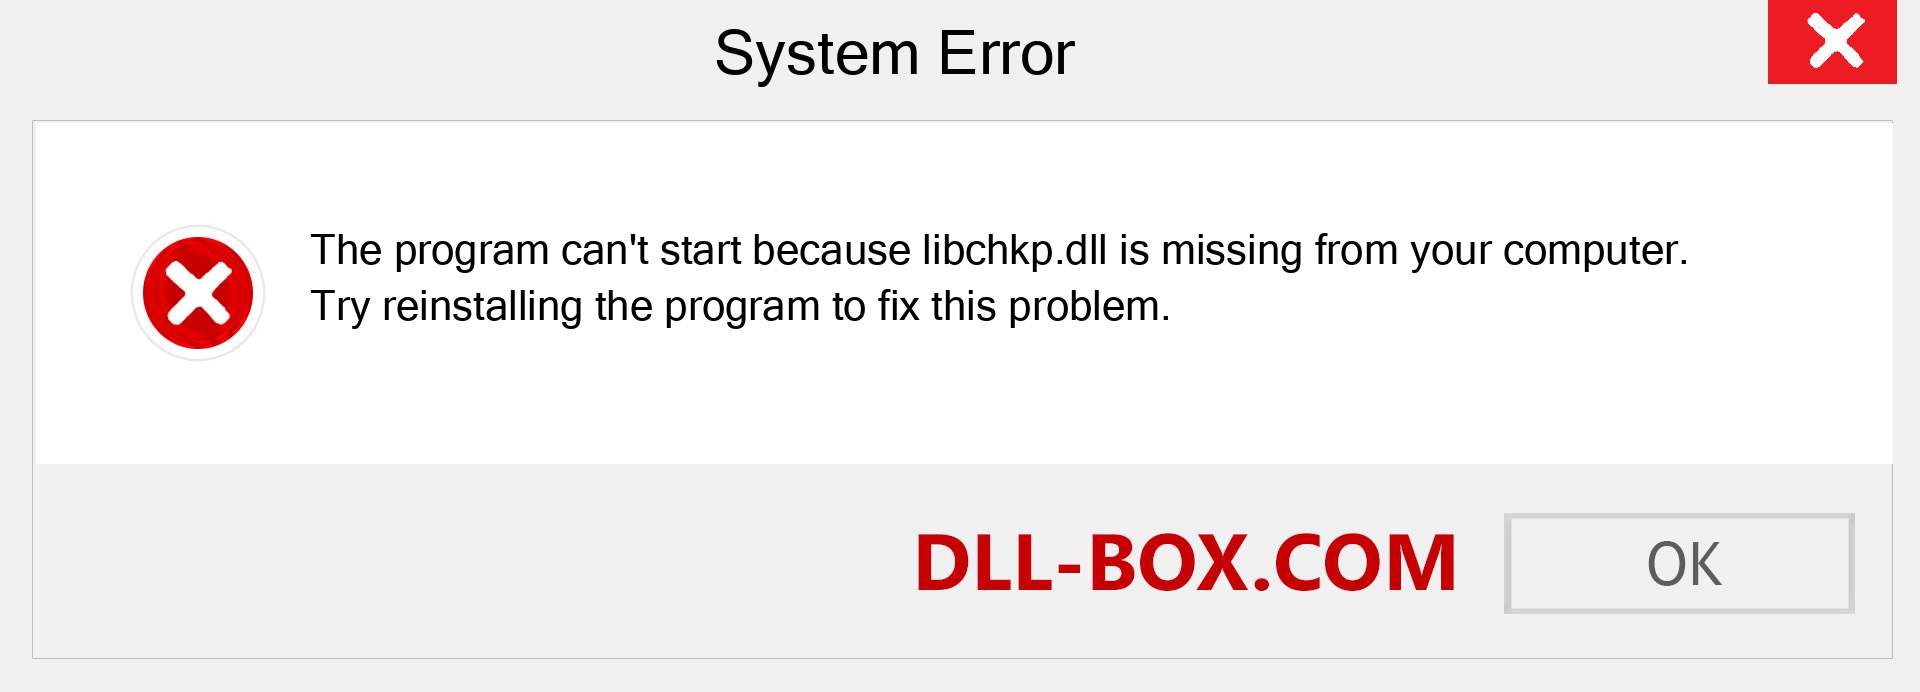  libchkp.dll file is missing?. Download for Windows 7, 8, 10 - Fix  libchkp dll Missing Error on Windows, photos, images